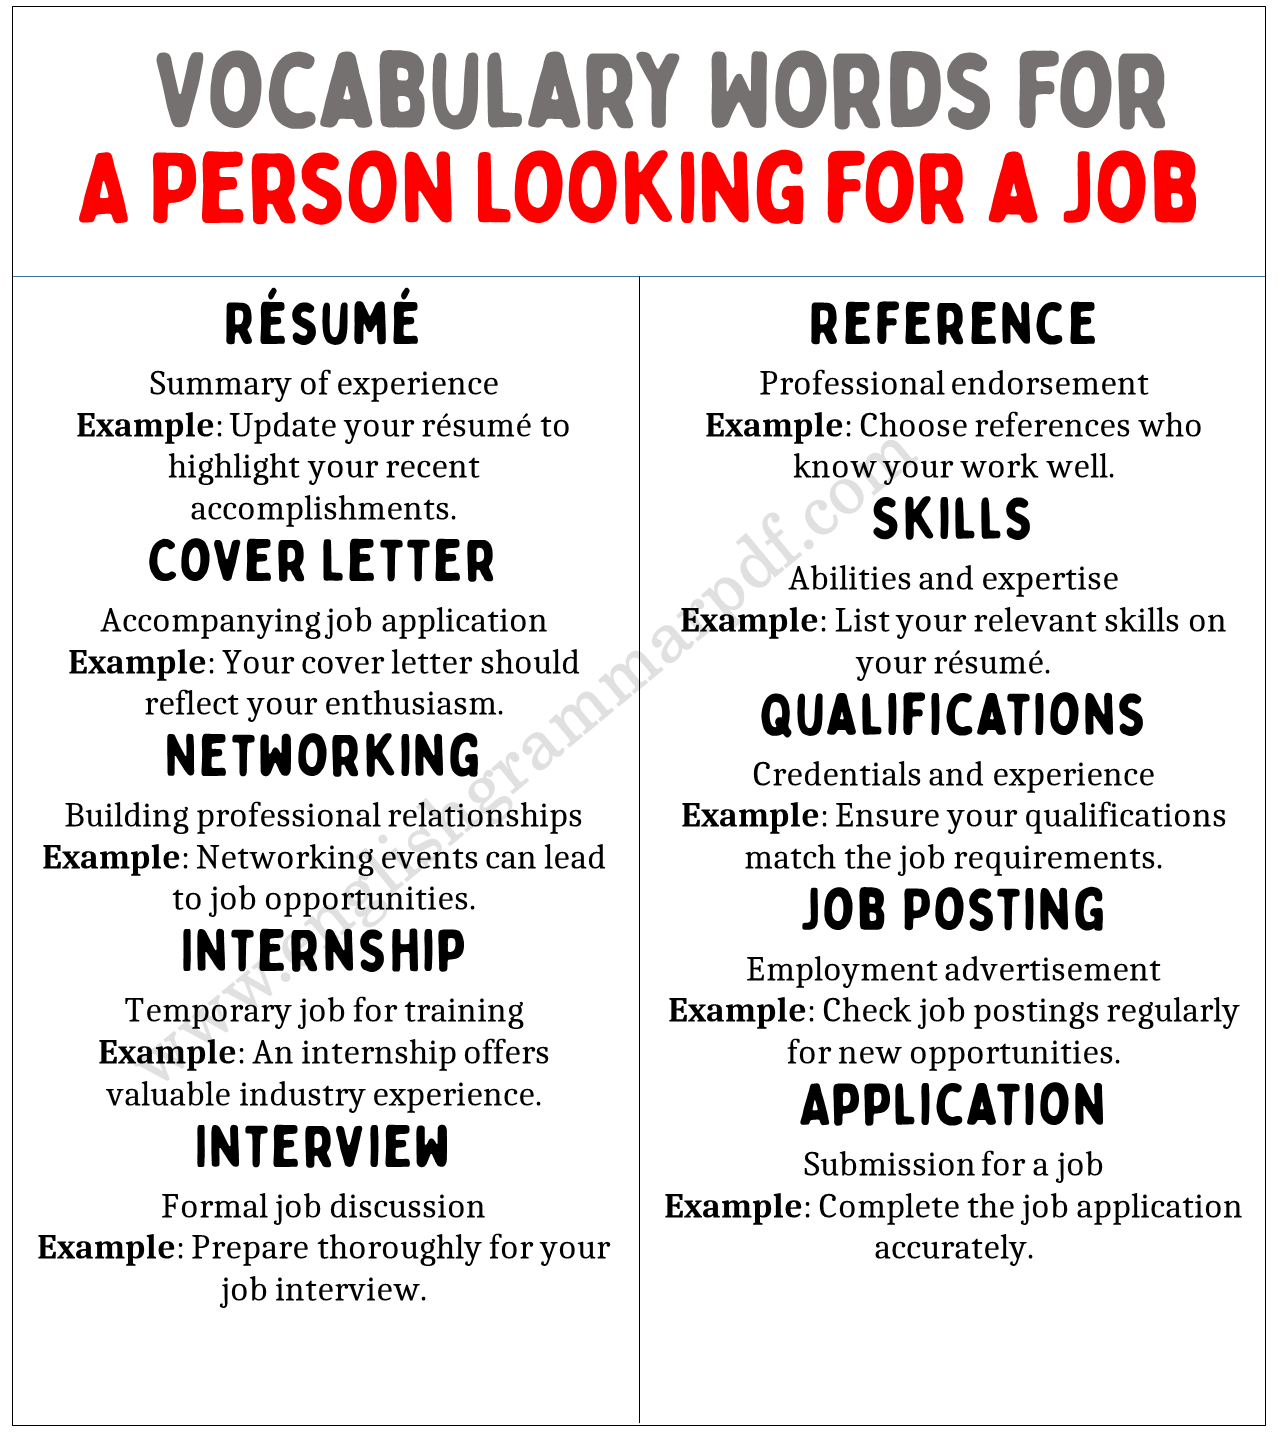 Vocabulary For a Person Looking for a Job